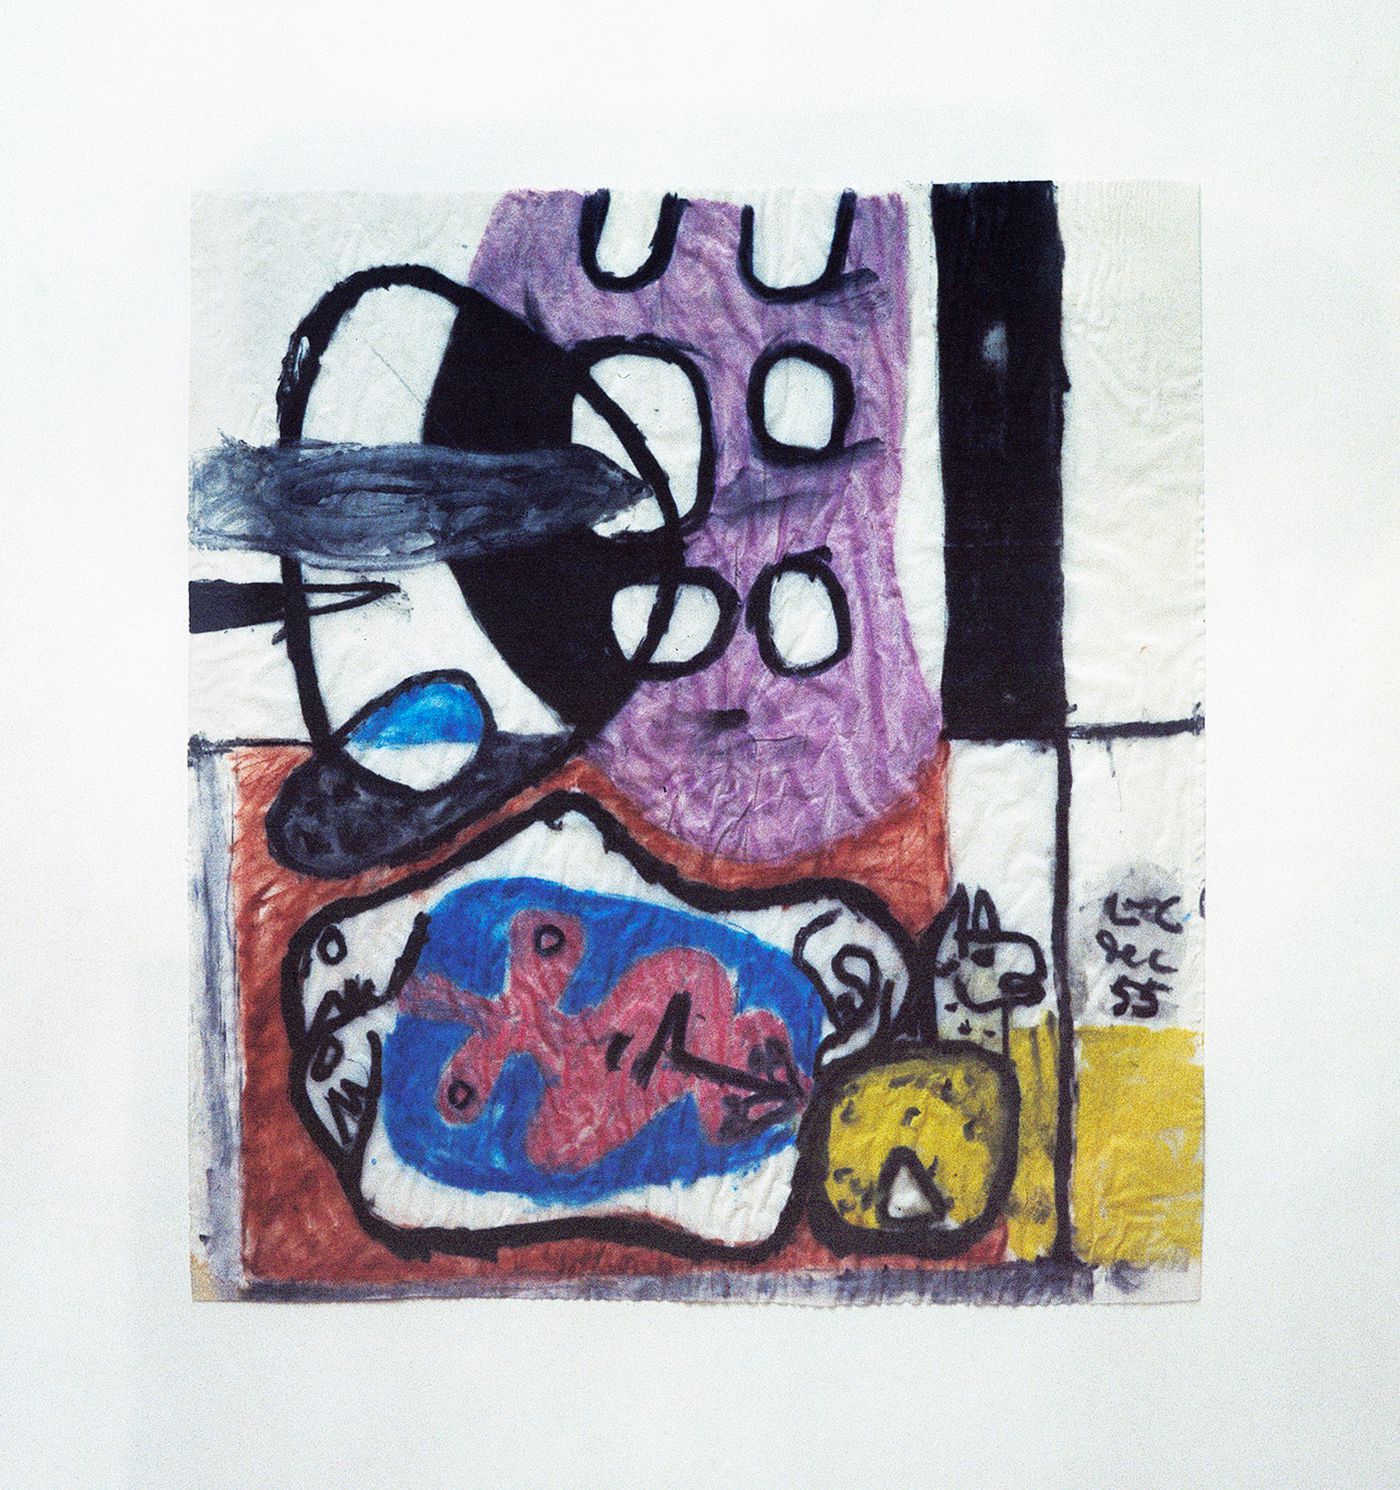 Photograph of a painting by Le Corbusier